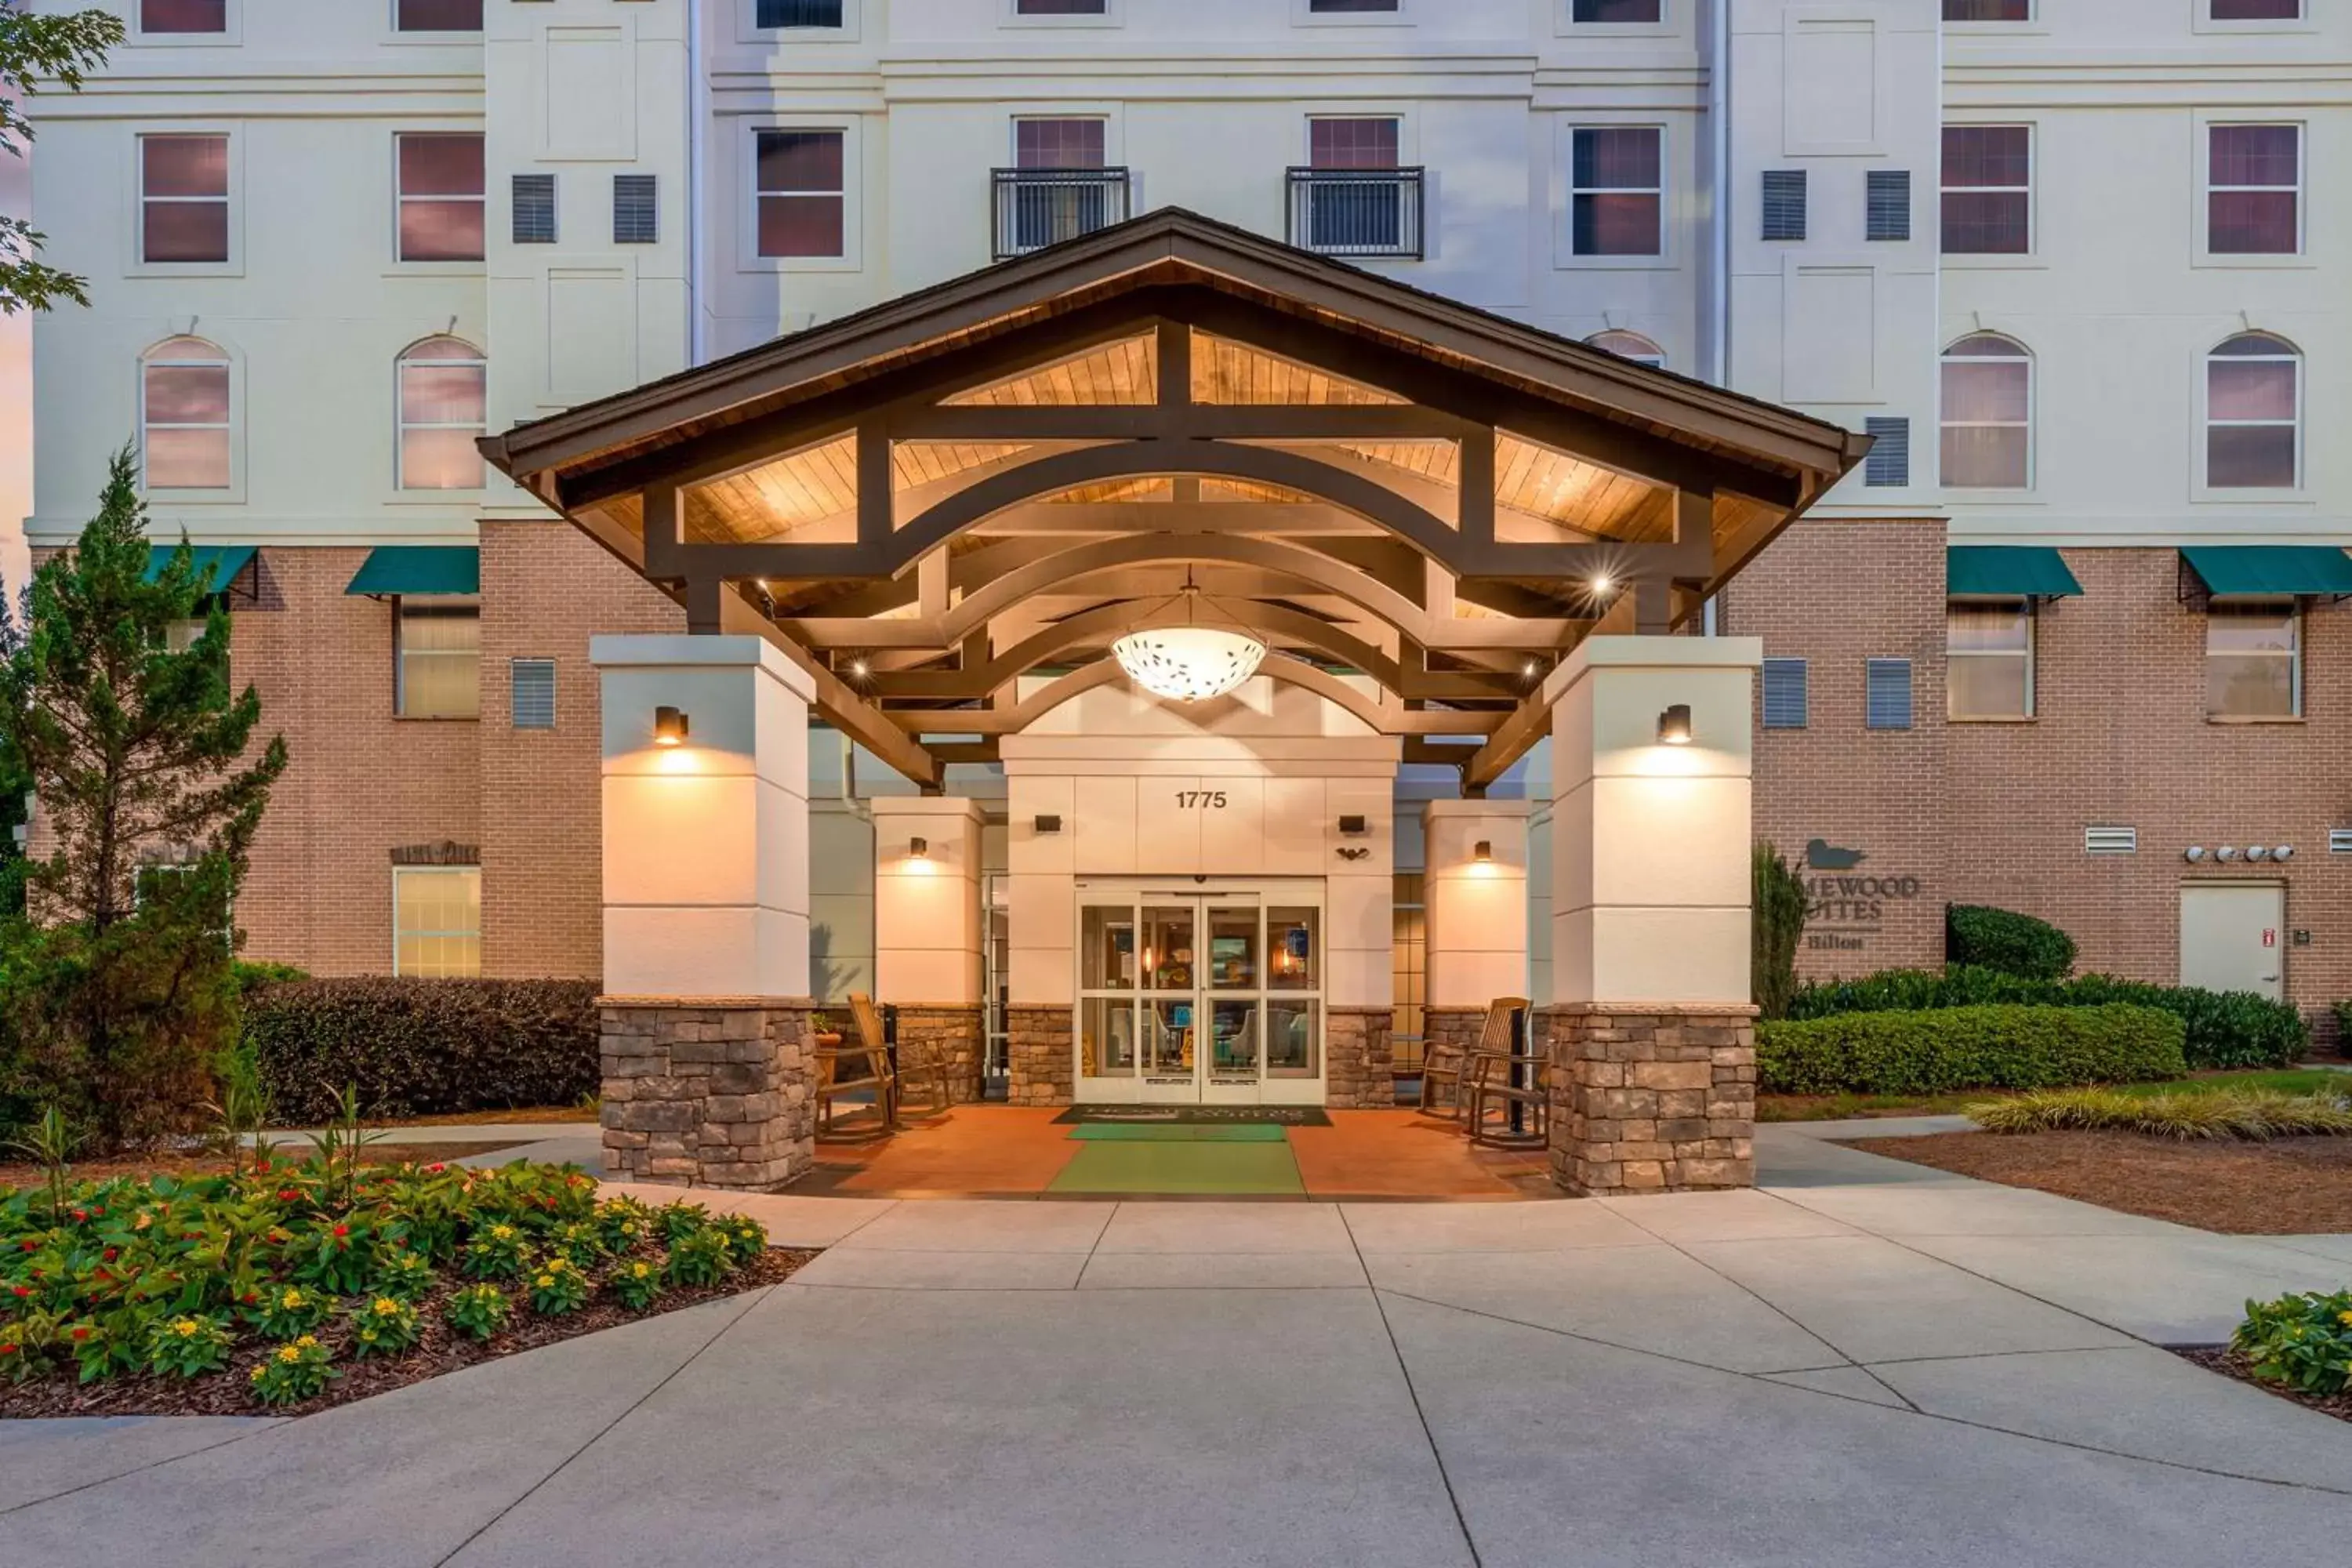 Property building in Homewood Suites by Hilton Lawrenceville Duluth